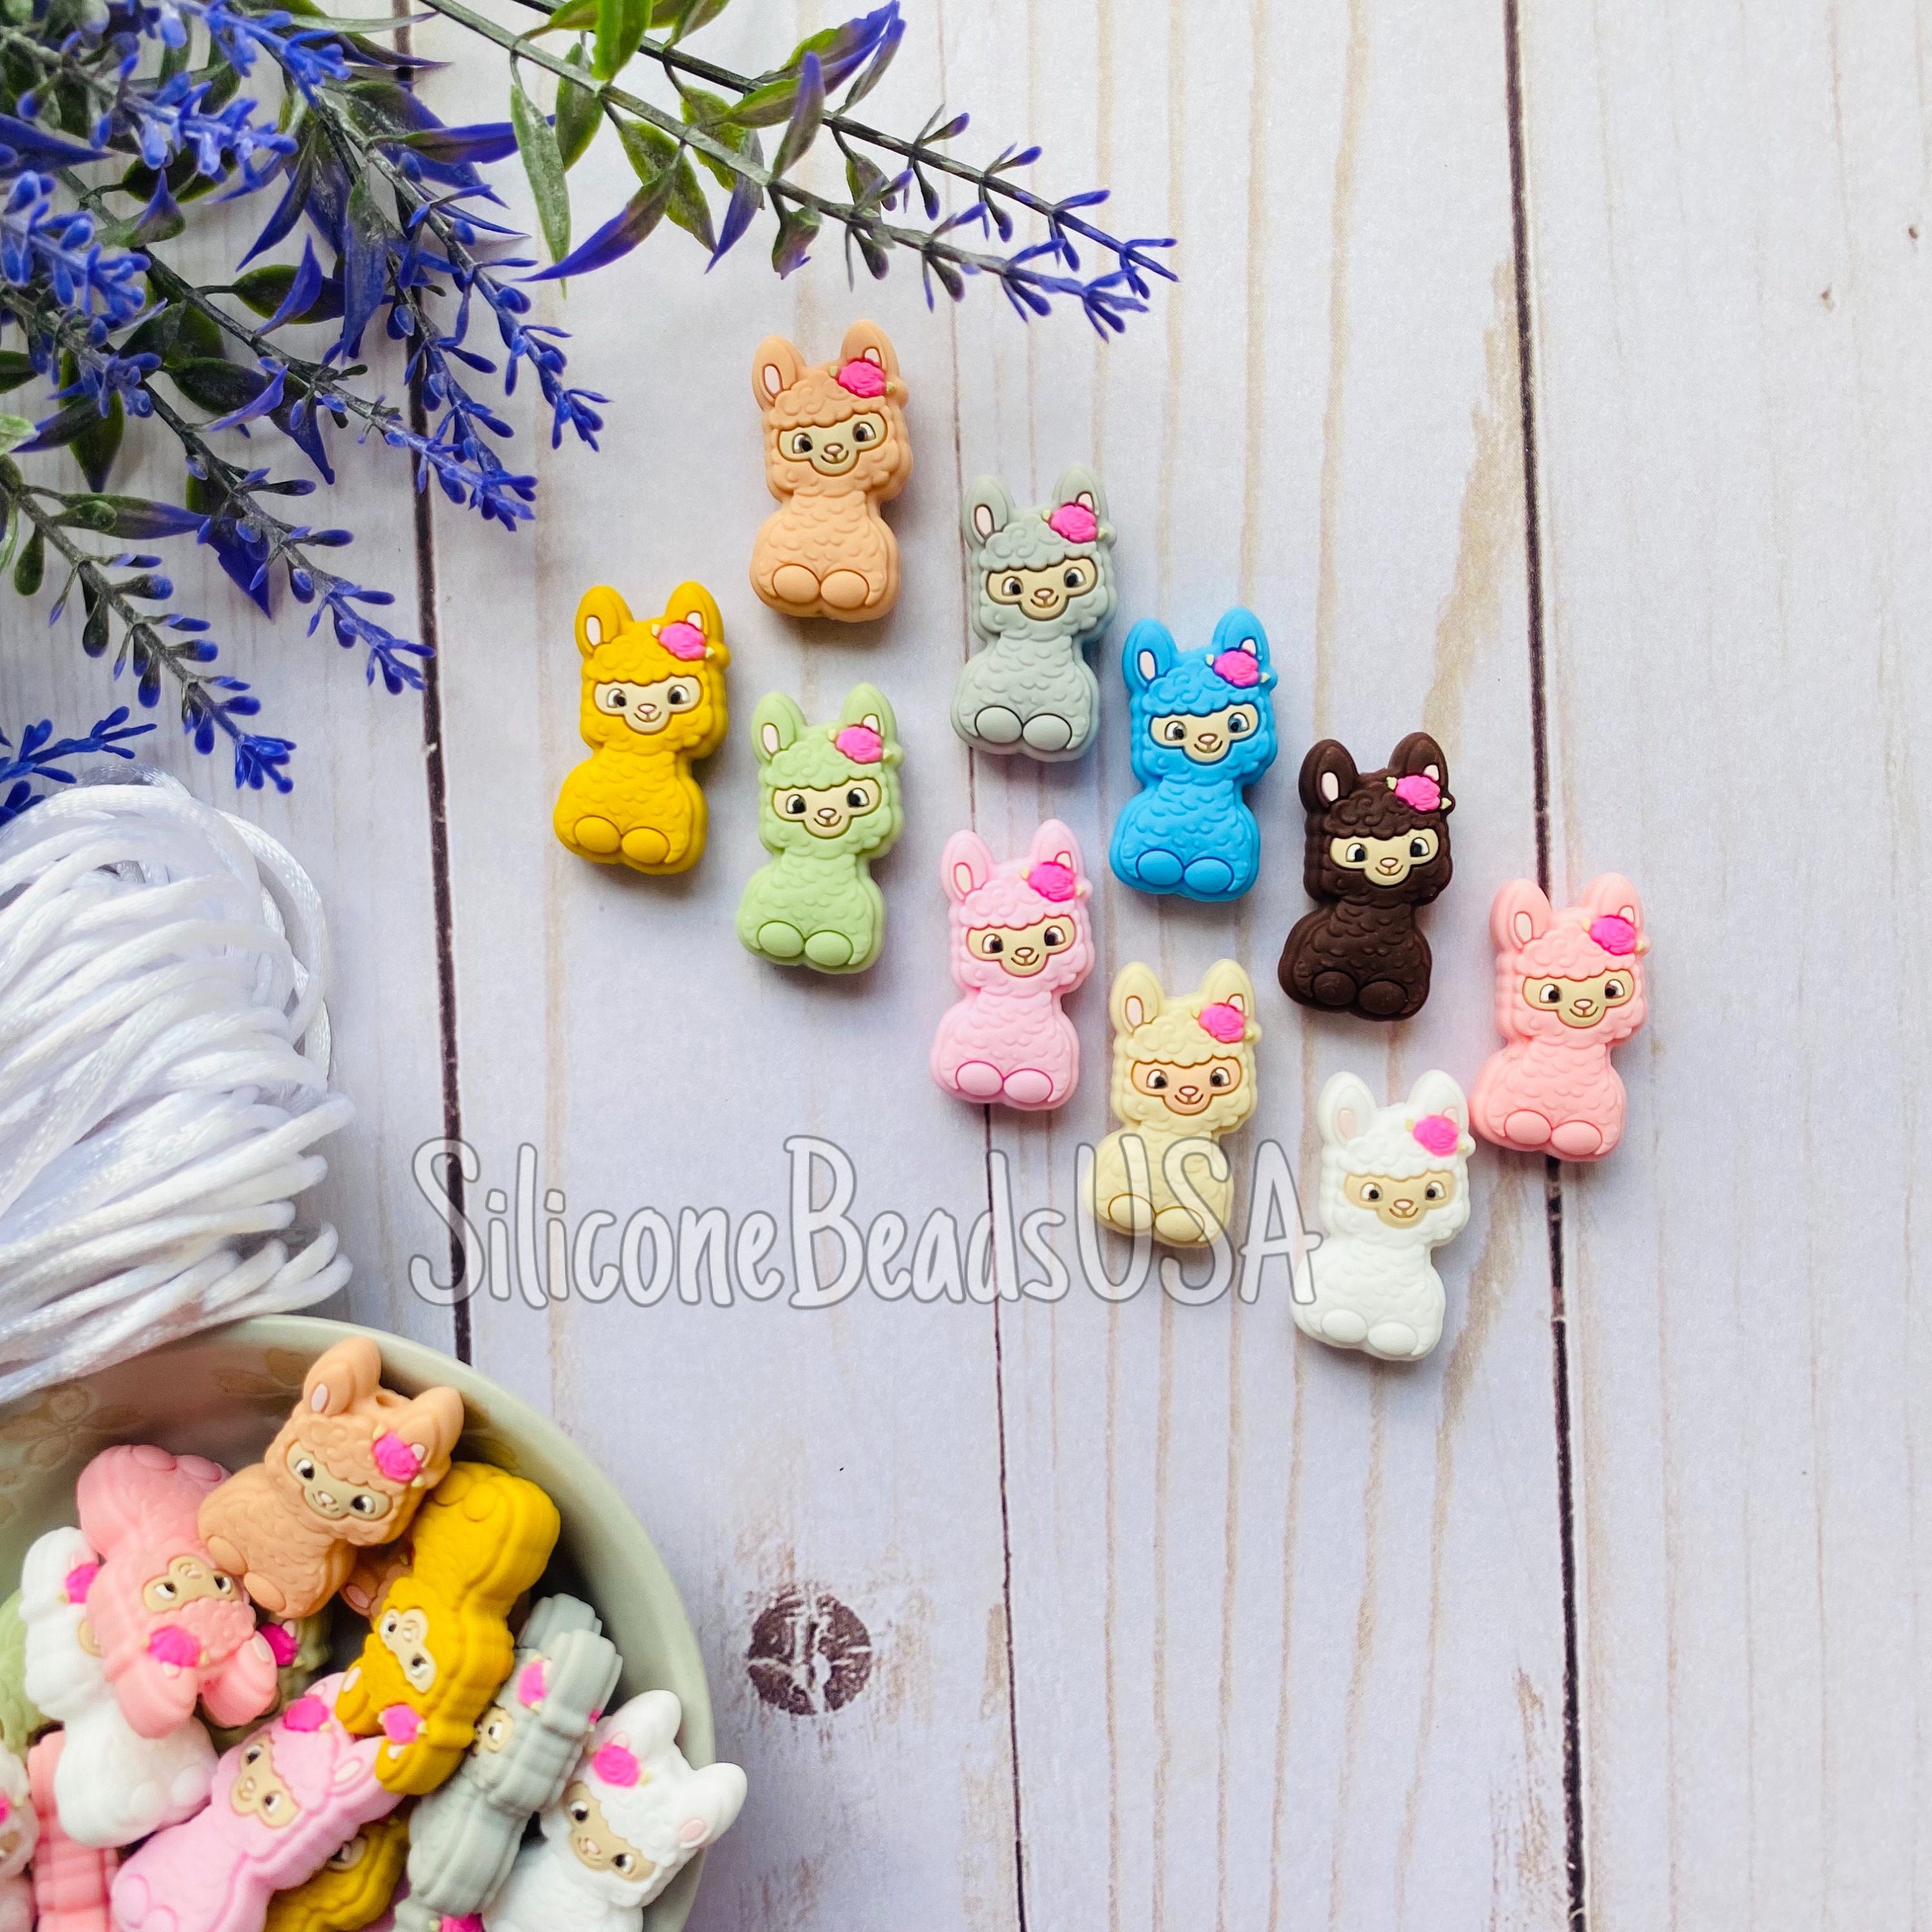 Silicone Focal Beads, 10pcs Silicone Animals Silicone Beads Bulk Silicone Focal Beads Characters Rubber Beads Silicone Beads for Keychain Making Pen